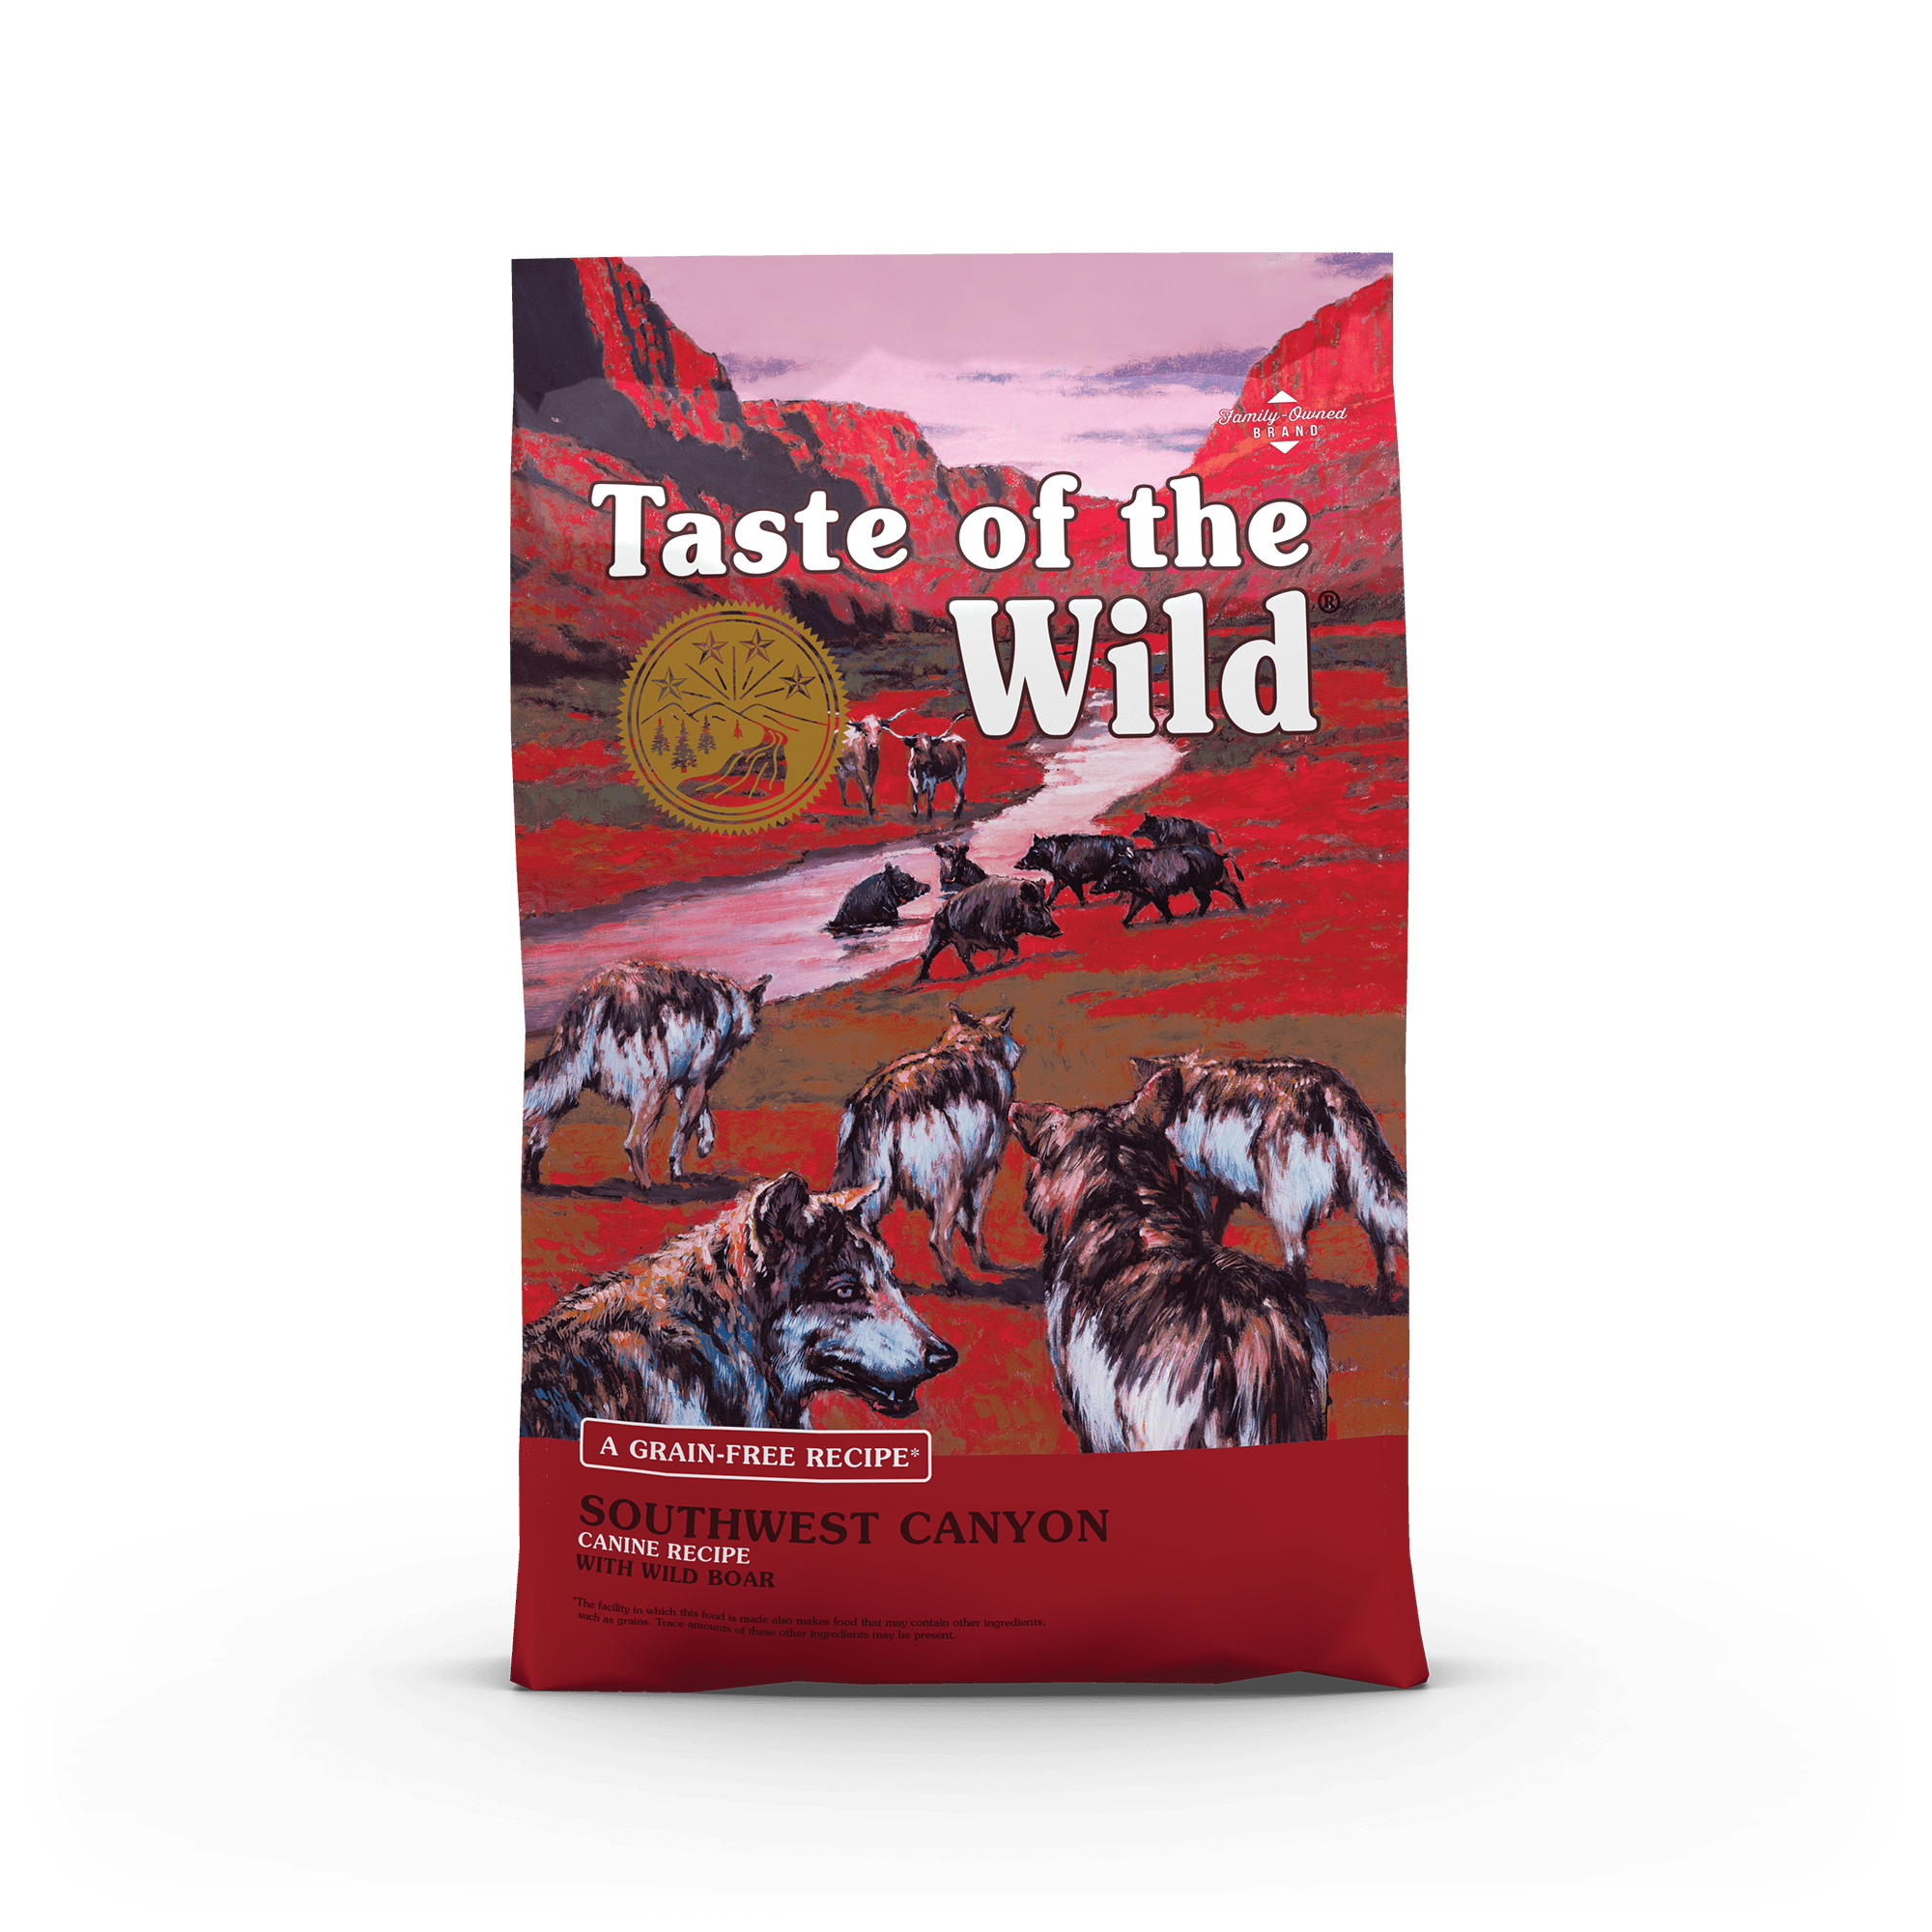 Taste of the Wild Grain-Free Southwest Canyon Canine Recipe with Wild Boar package